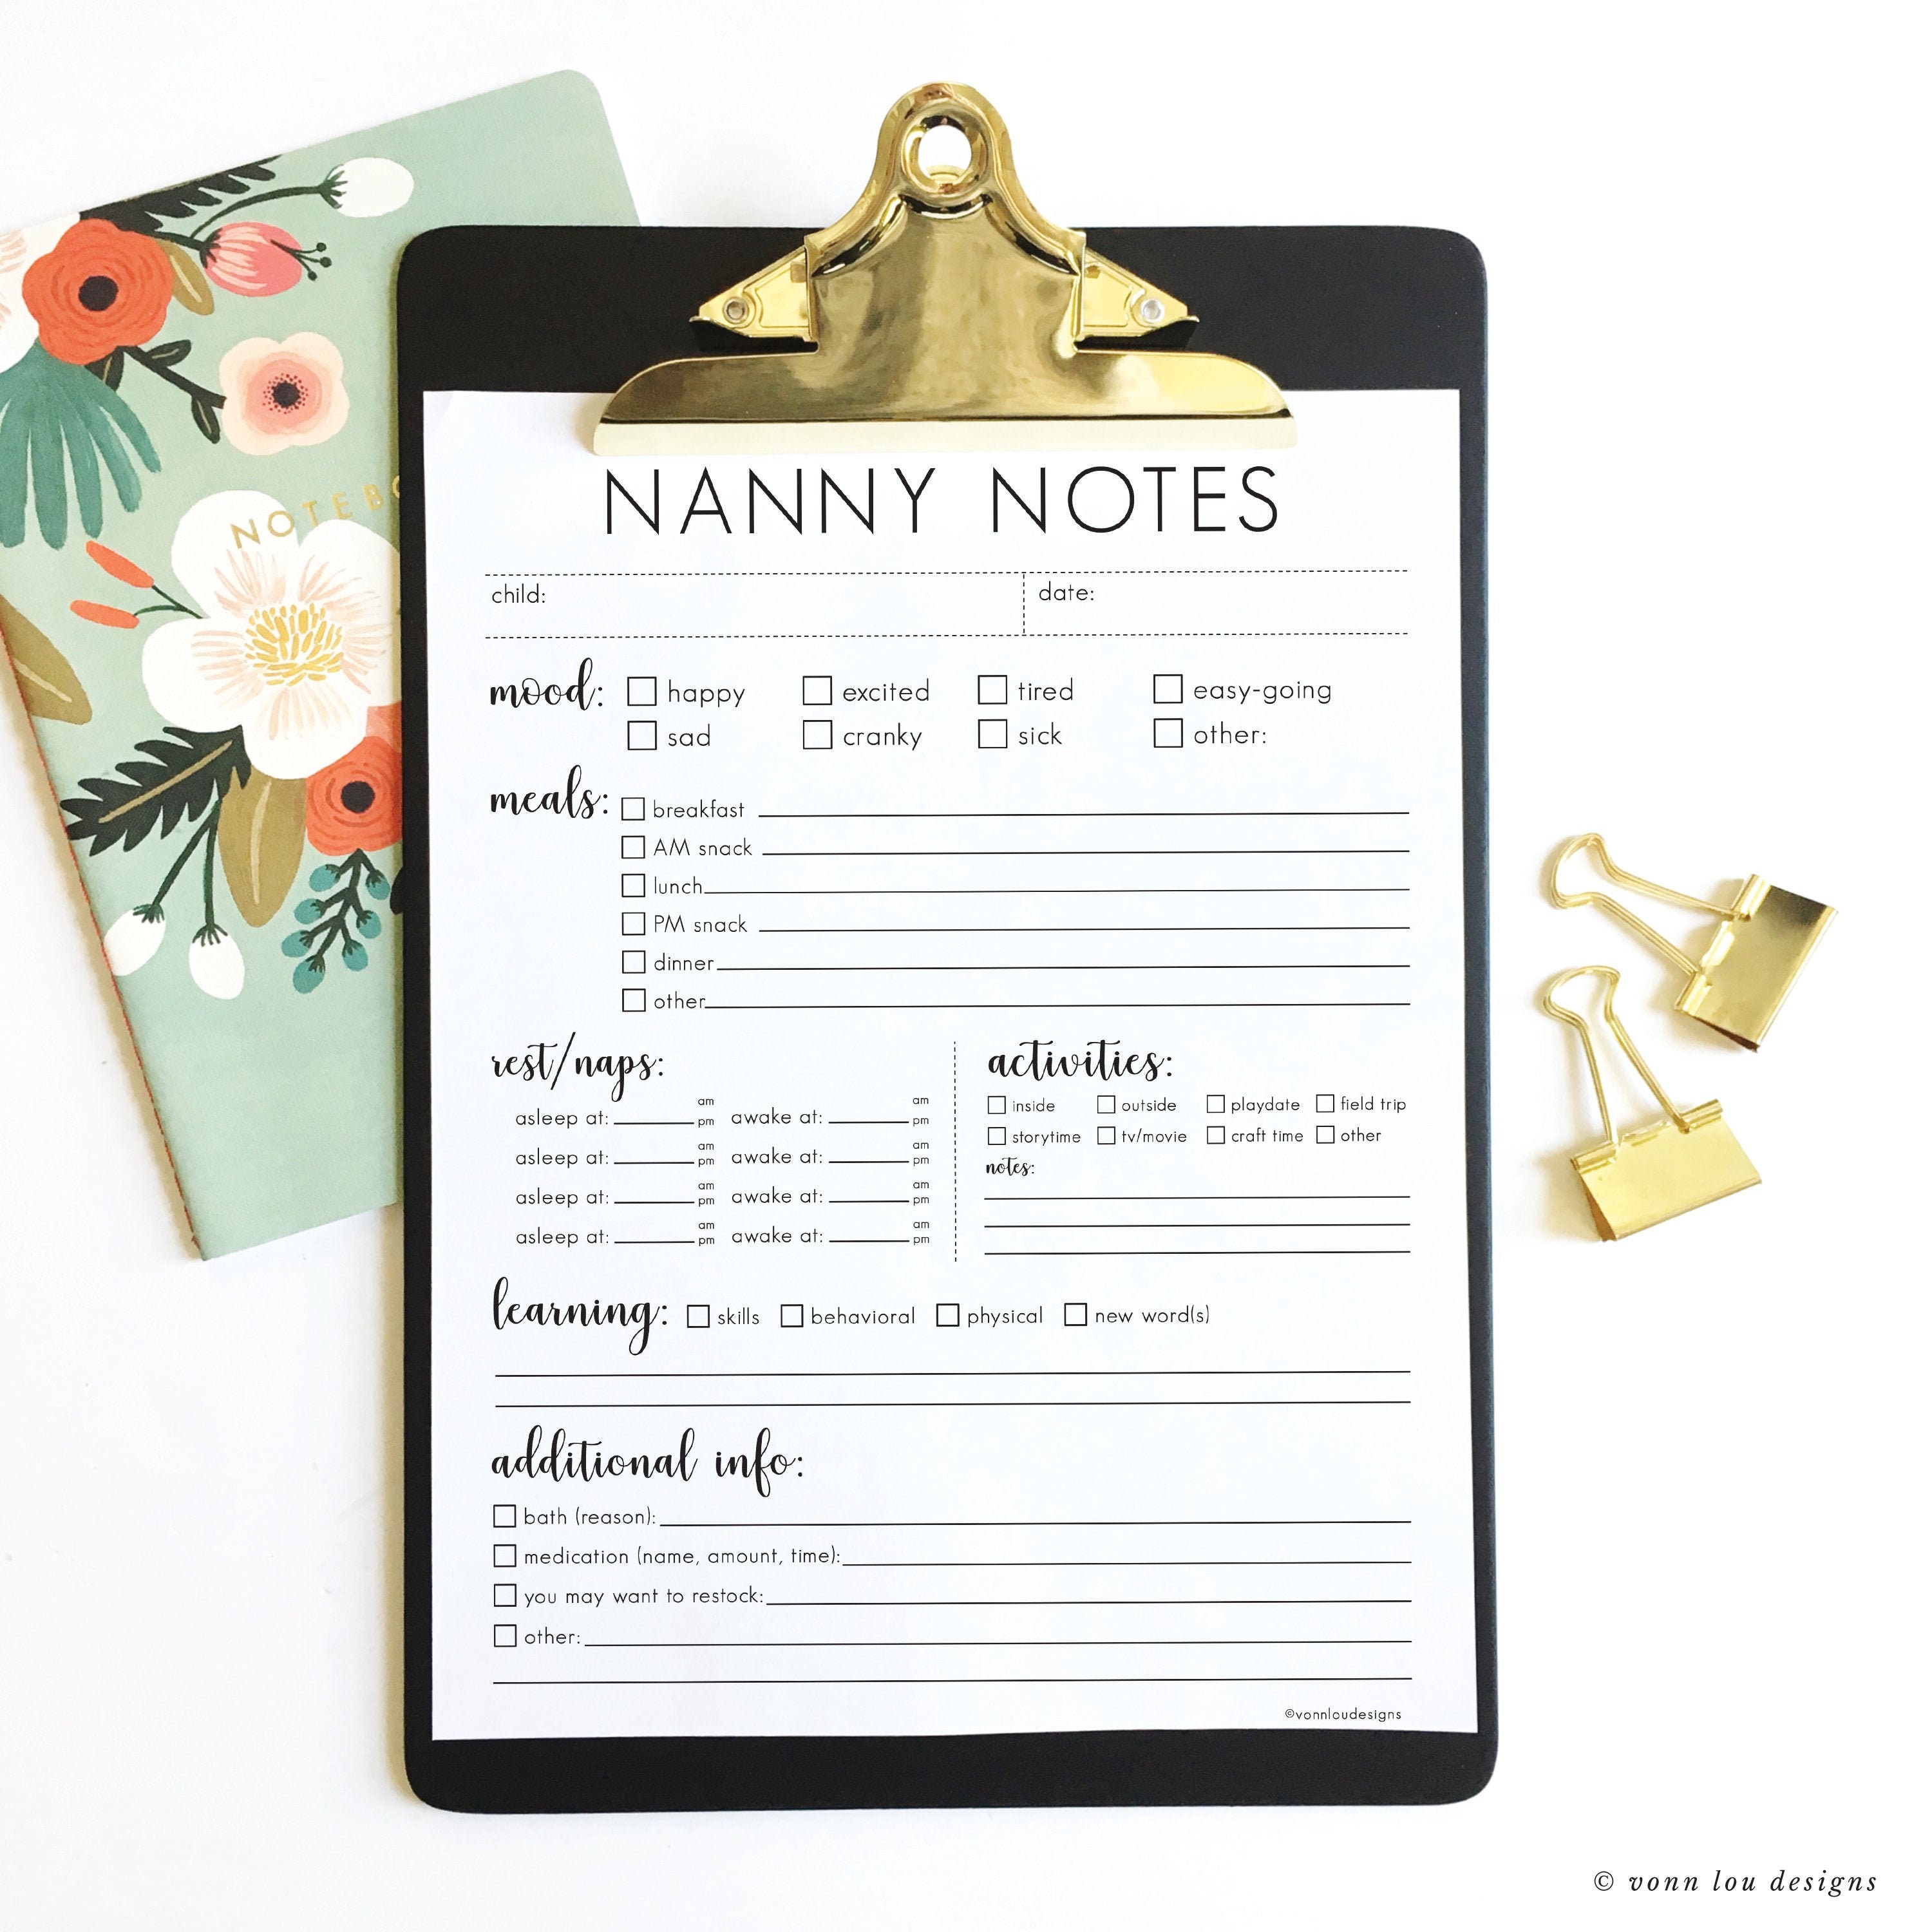 nanny notes - nanny information sheet - printable instant download - DIY -  simple - nanny form - babysitter info - sitter - daycare report Pertaining To Nanny Notes Template